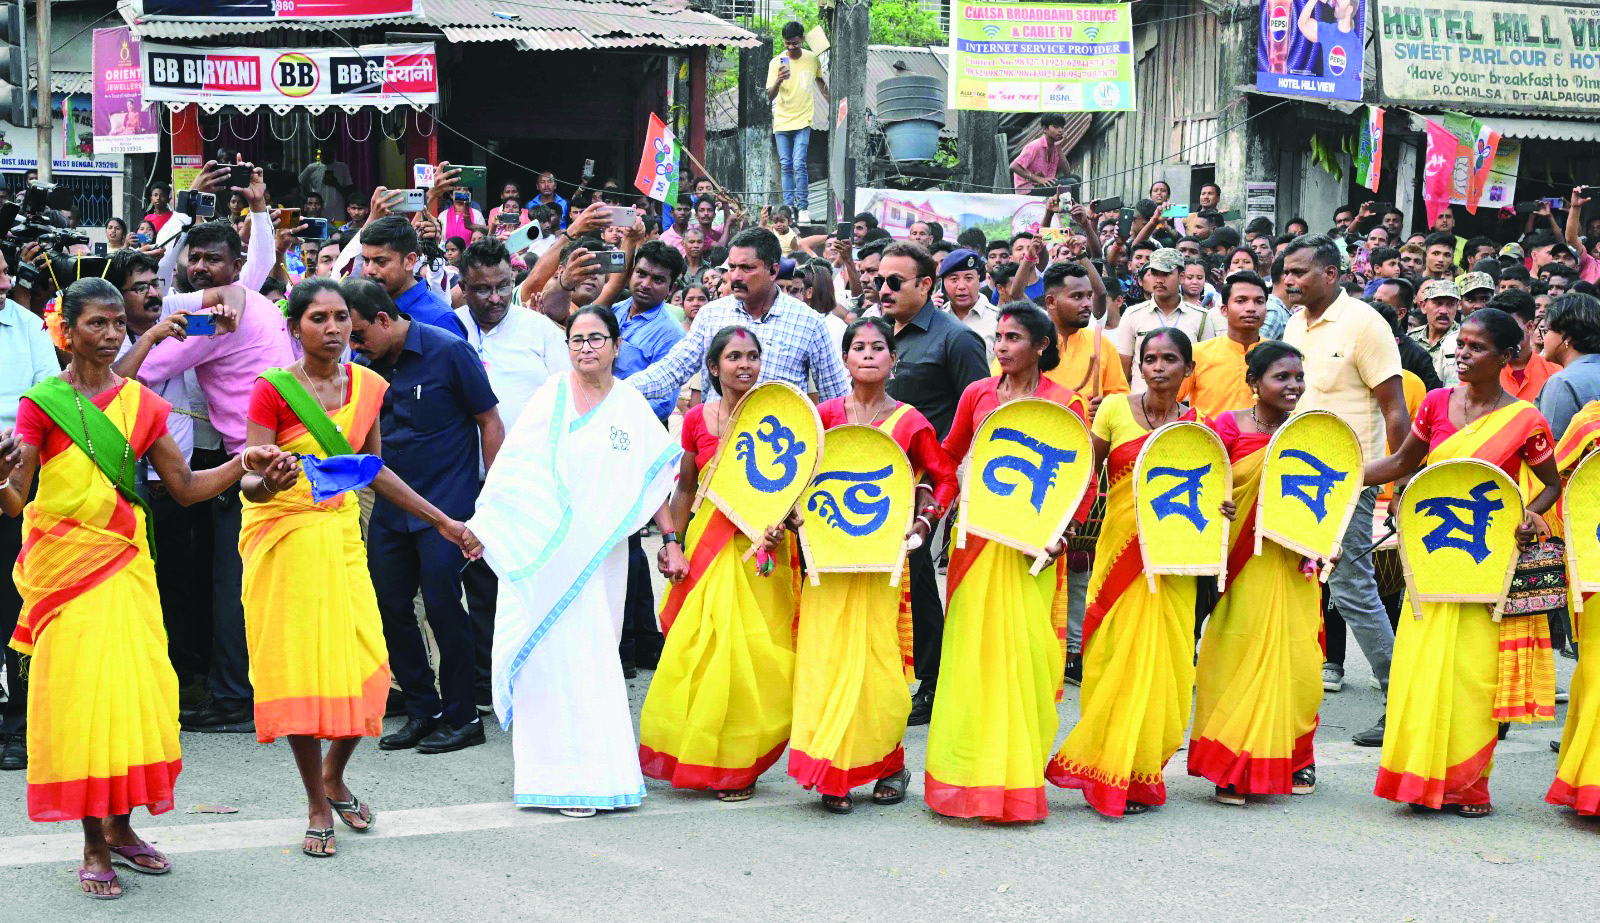 CM’s Chalsa rally reinforces ‘unity in diversity’ message BY